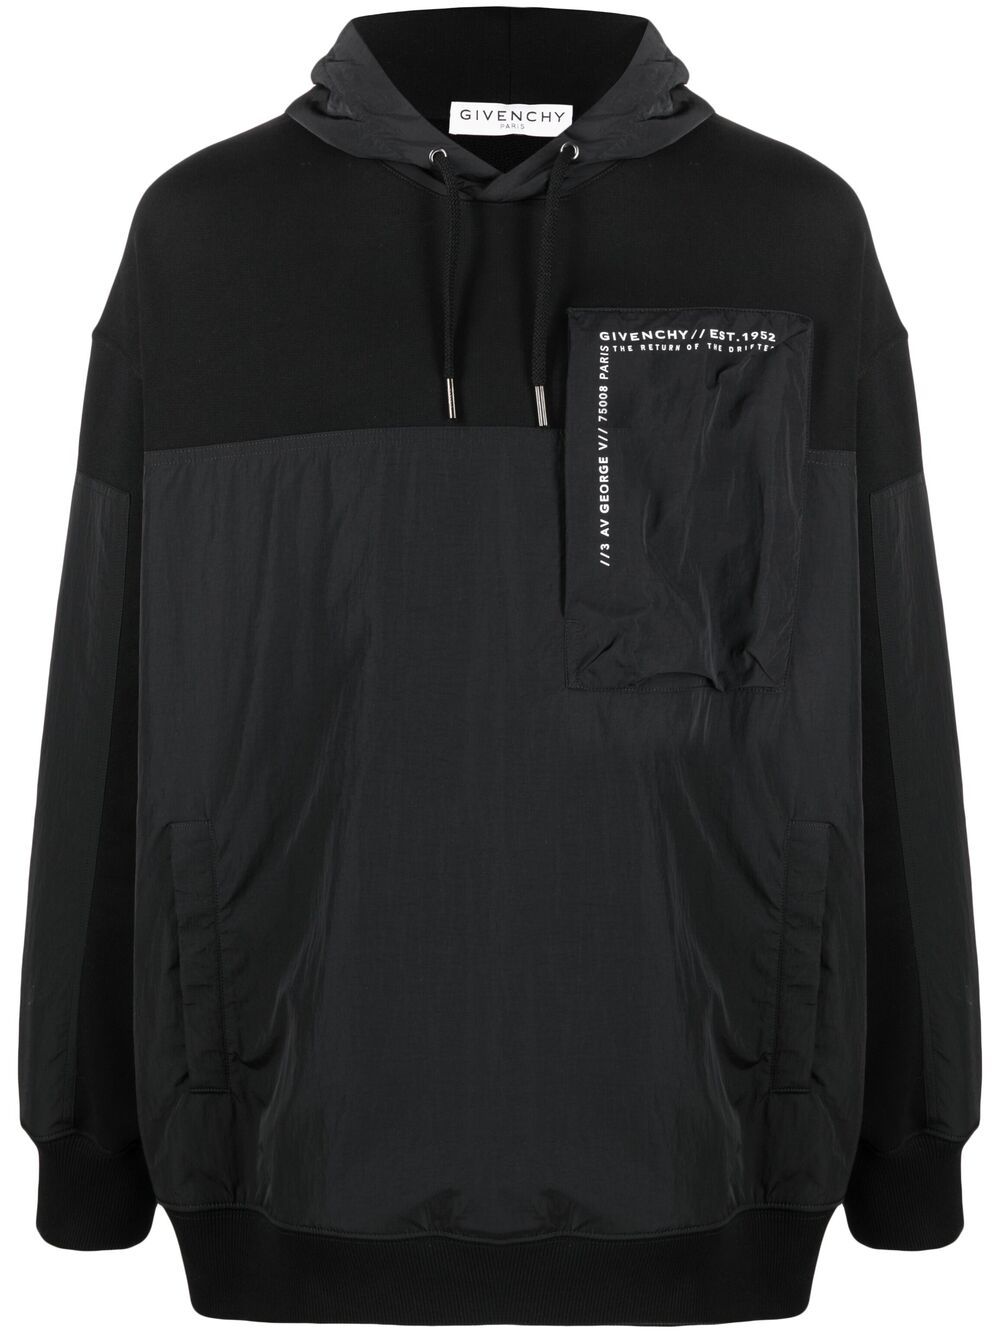 Shop Givenchy panelled logo hoodie with Express Delivery - FARFETCH